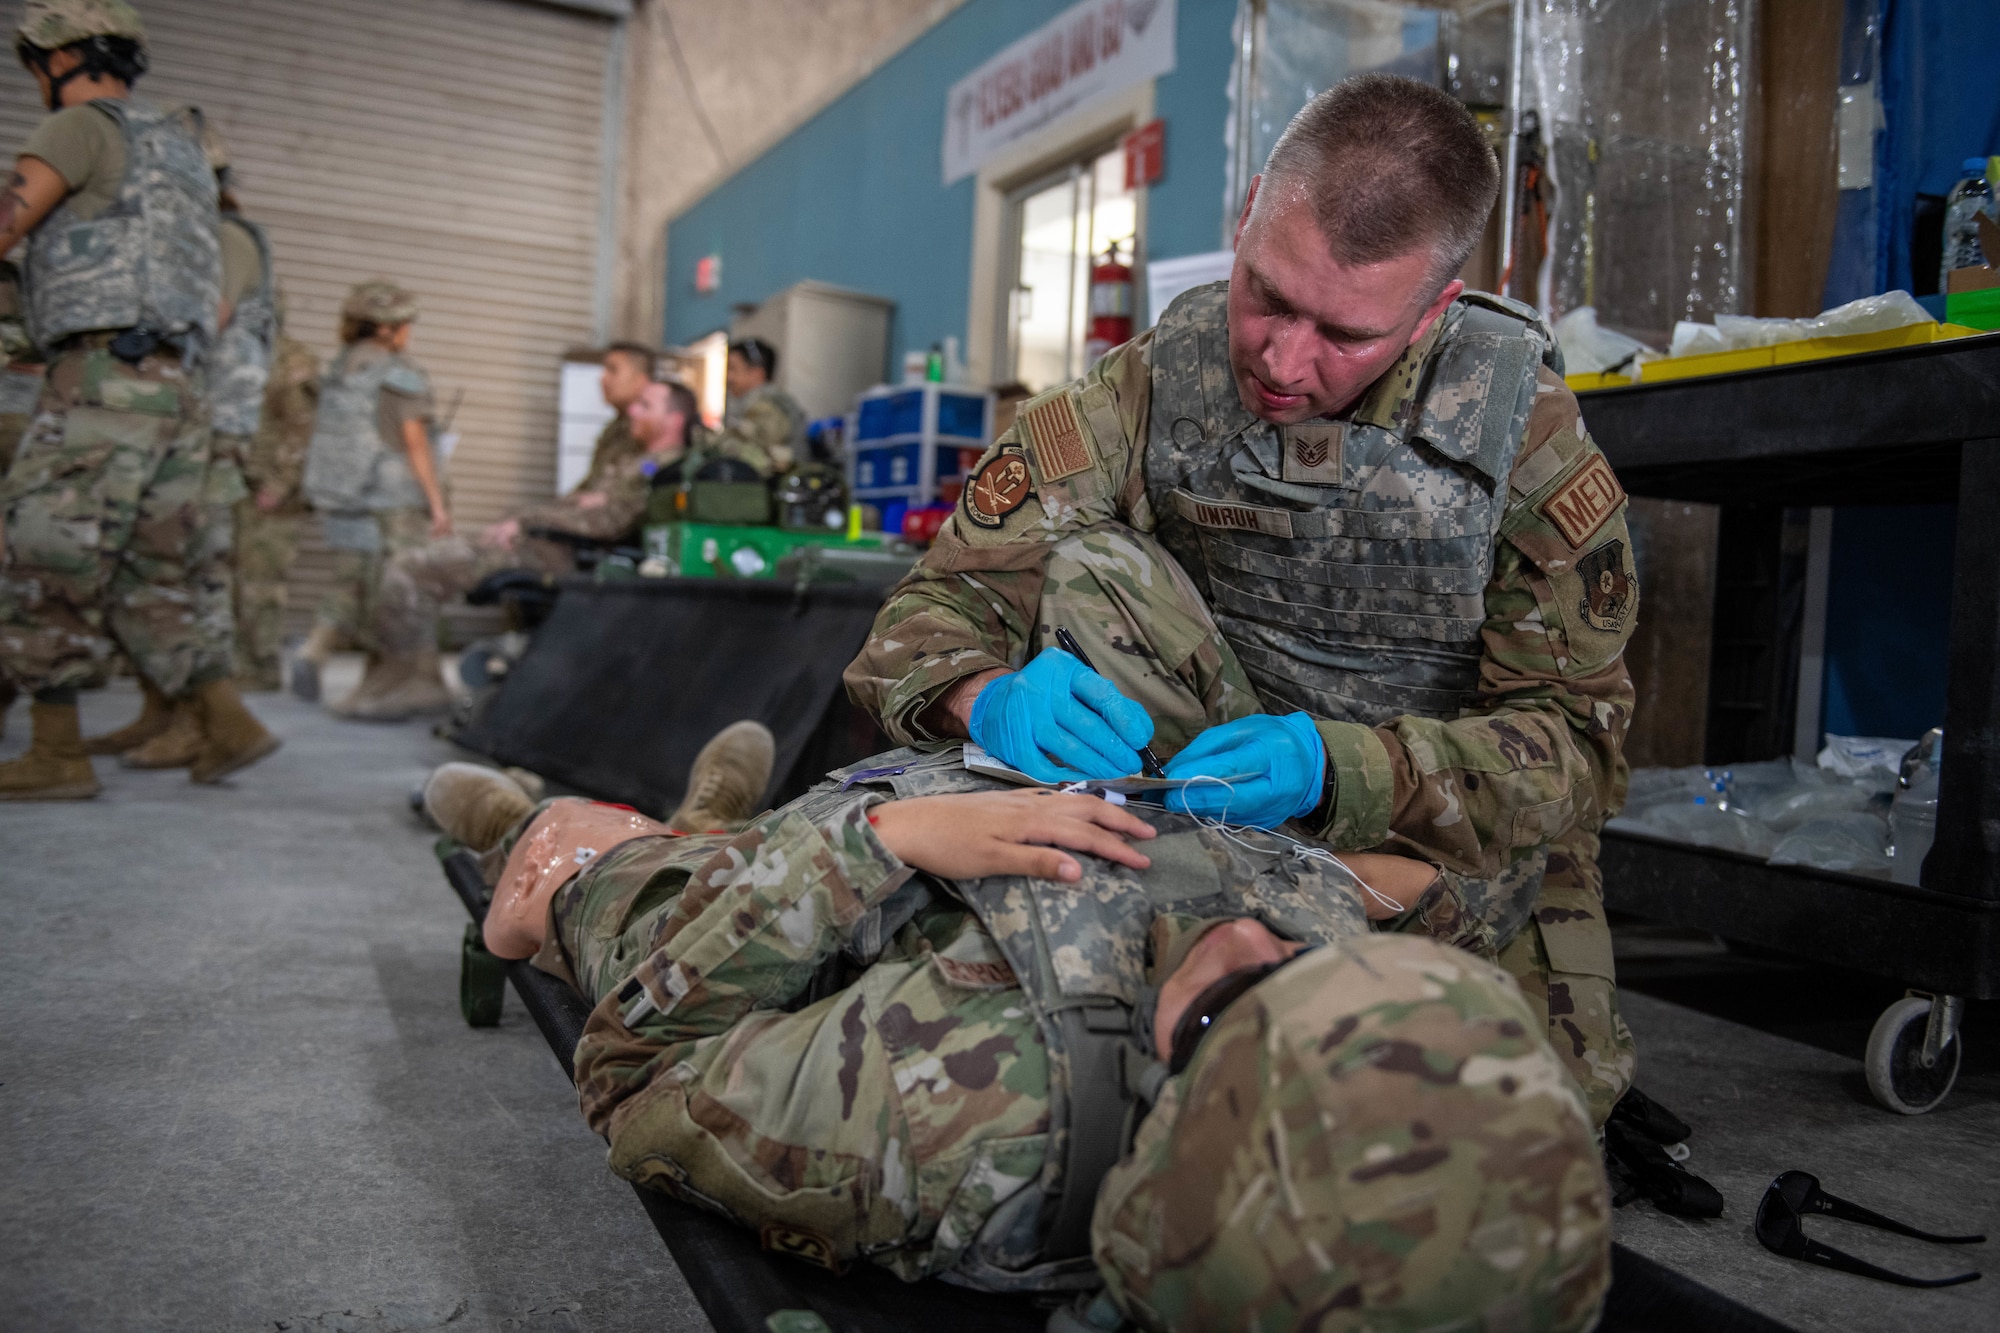 U.S. Air Force Tech. Sgt. Michael Unruh, a medic with the 379th Expeditionary Operational Medical Readiness Squadron, treats a simulated casualty during Exercise Grand Shield 22-5 on Al Udeid Air Base, Qatar, Sept. 9, 2022. Firefighters, security forces, and medical personnel participated in the exercise. (U.S. Air National Guard photo by Airman 1st Class Constantine Bambakidis)